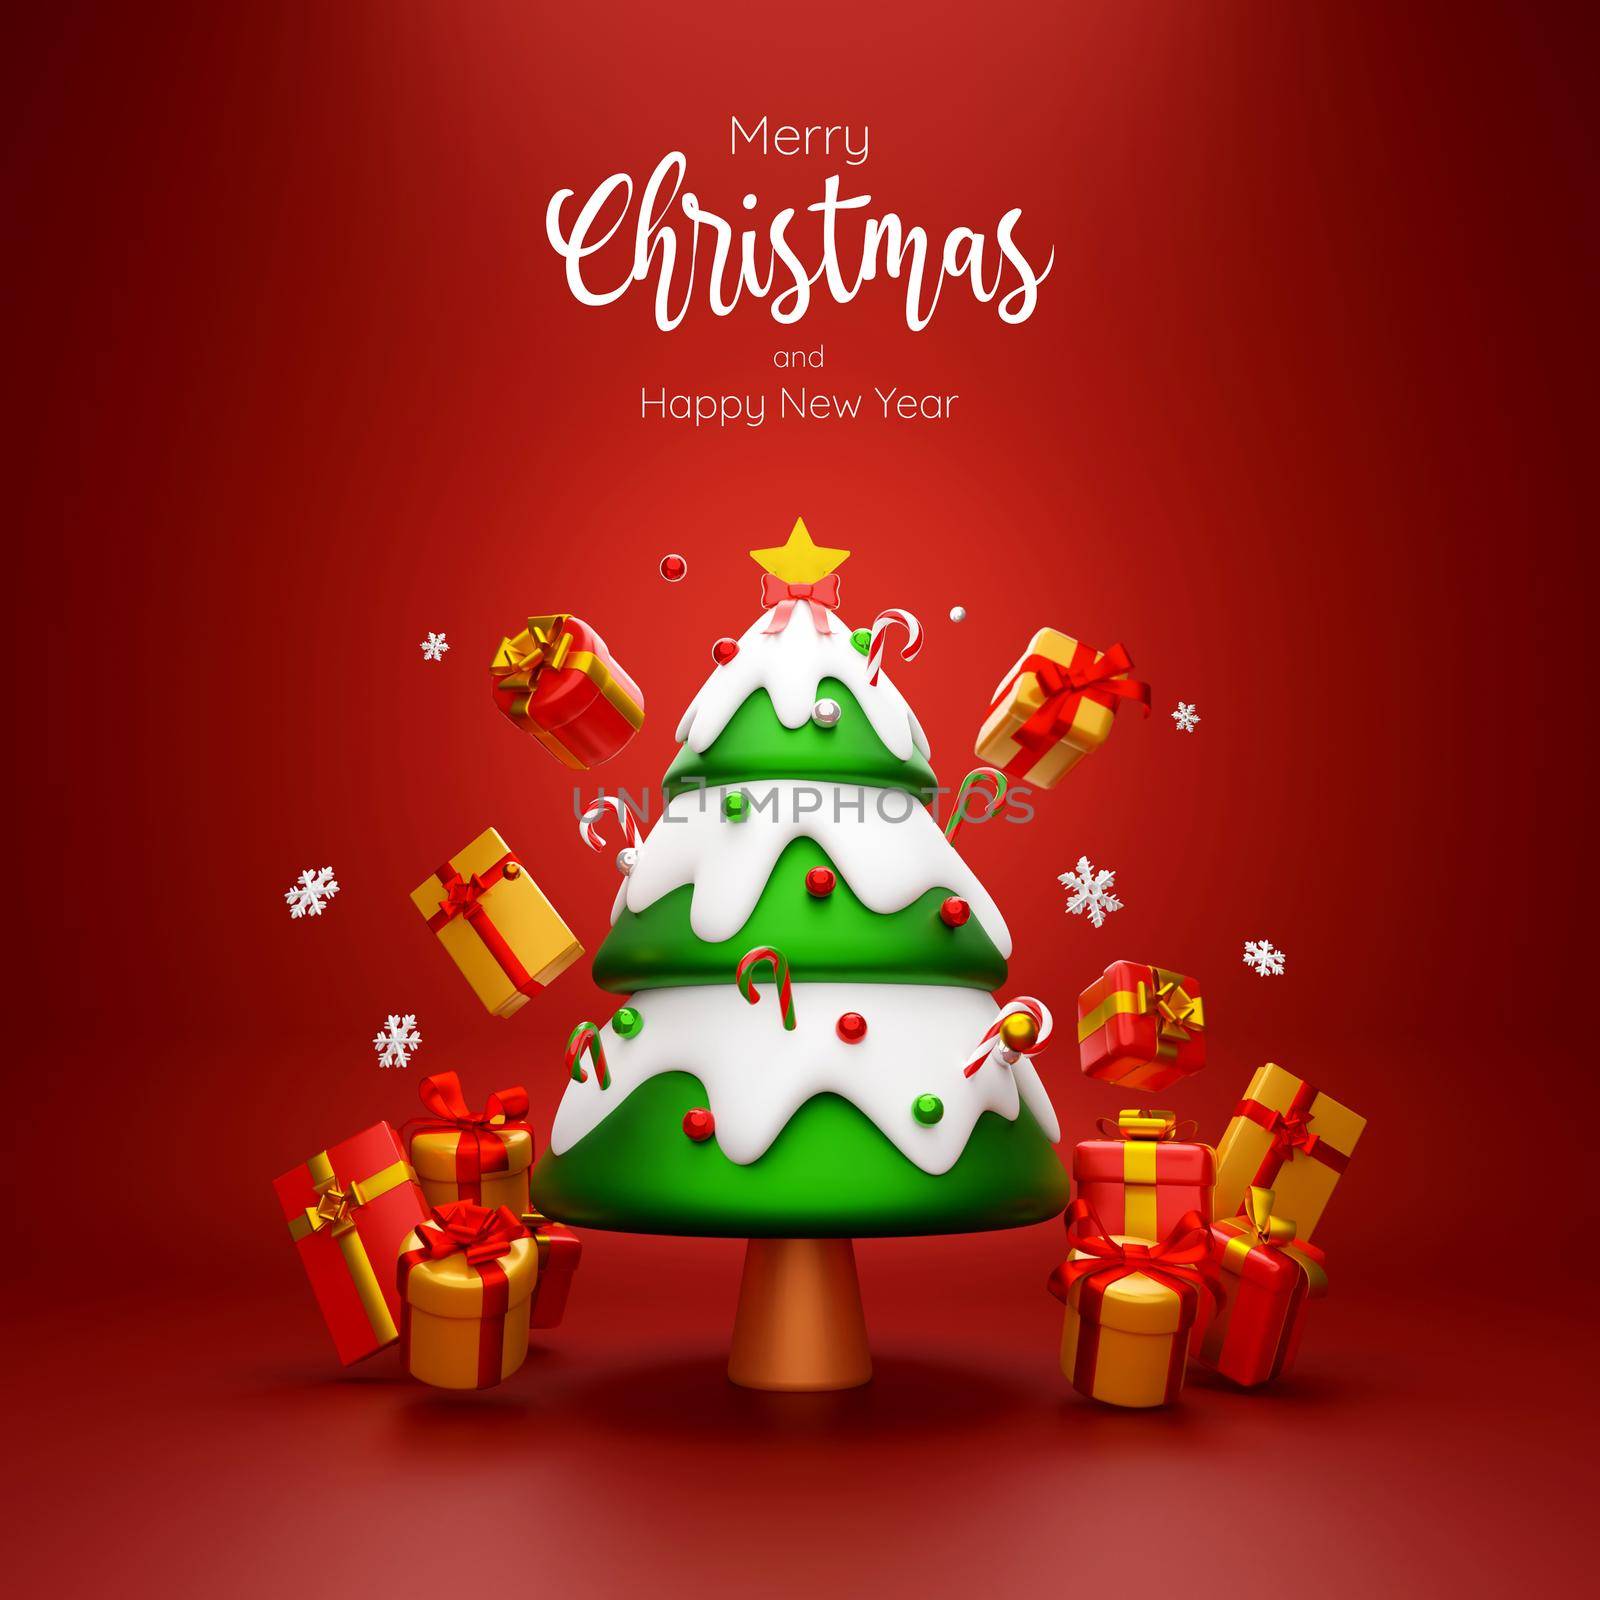 Scene of Christmas tree and gift box on red background, 3d illustration by nutzchotwarut